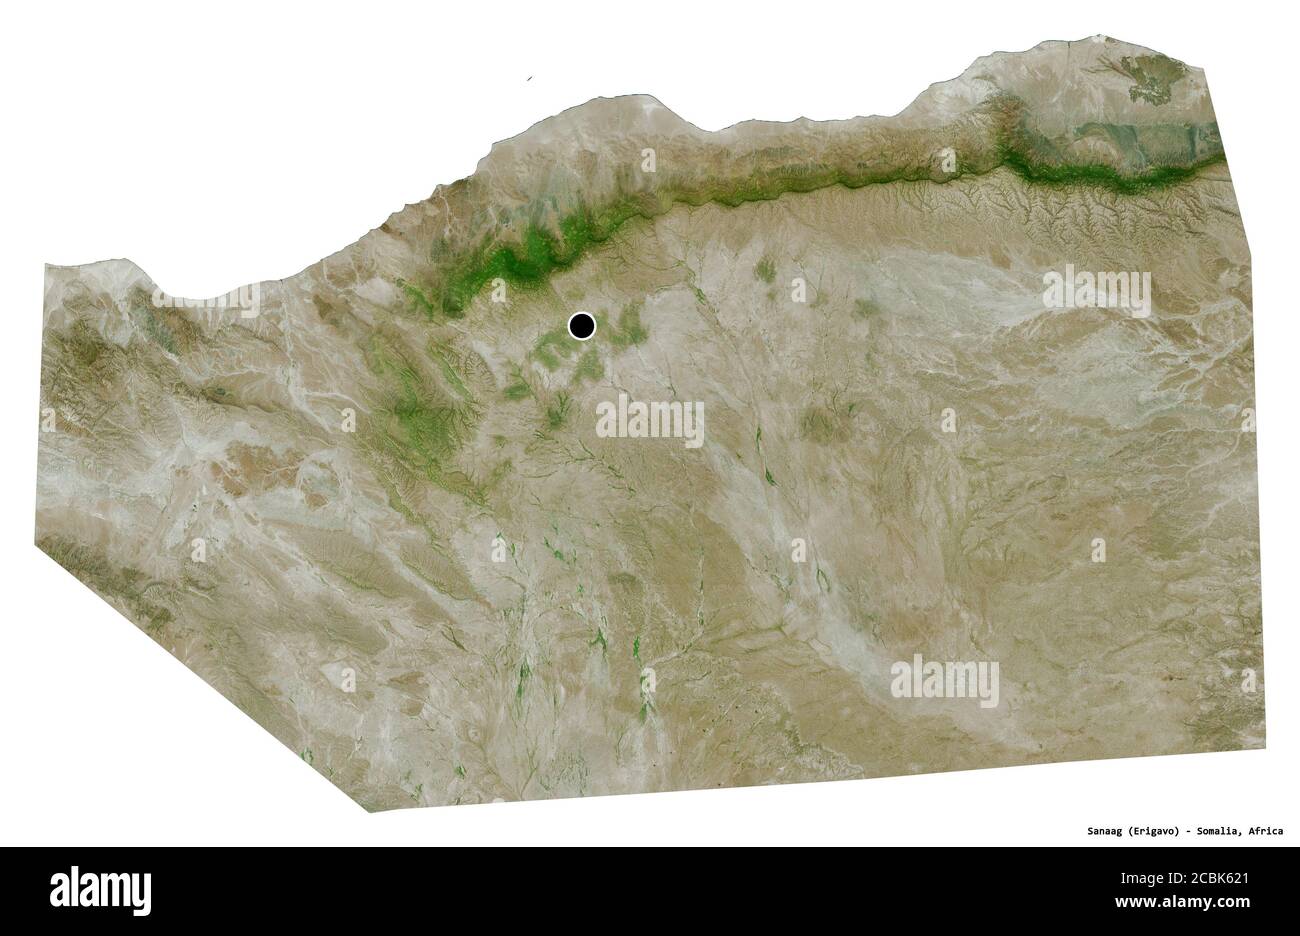 Shape of Sanaag, region of Somalia, with its capital isolated on white background. Satellite imagery. 3D rendering Stock Photo